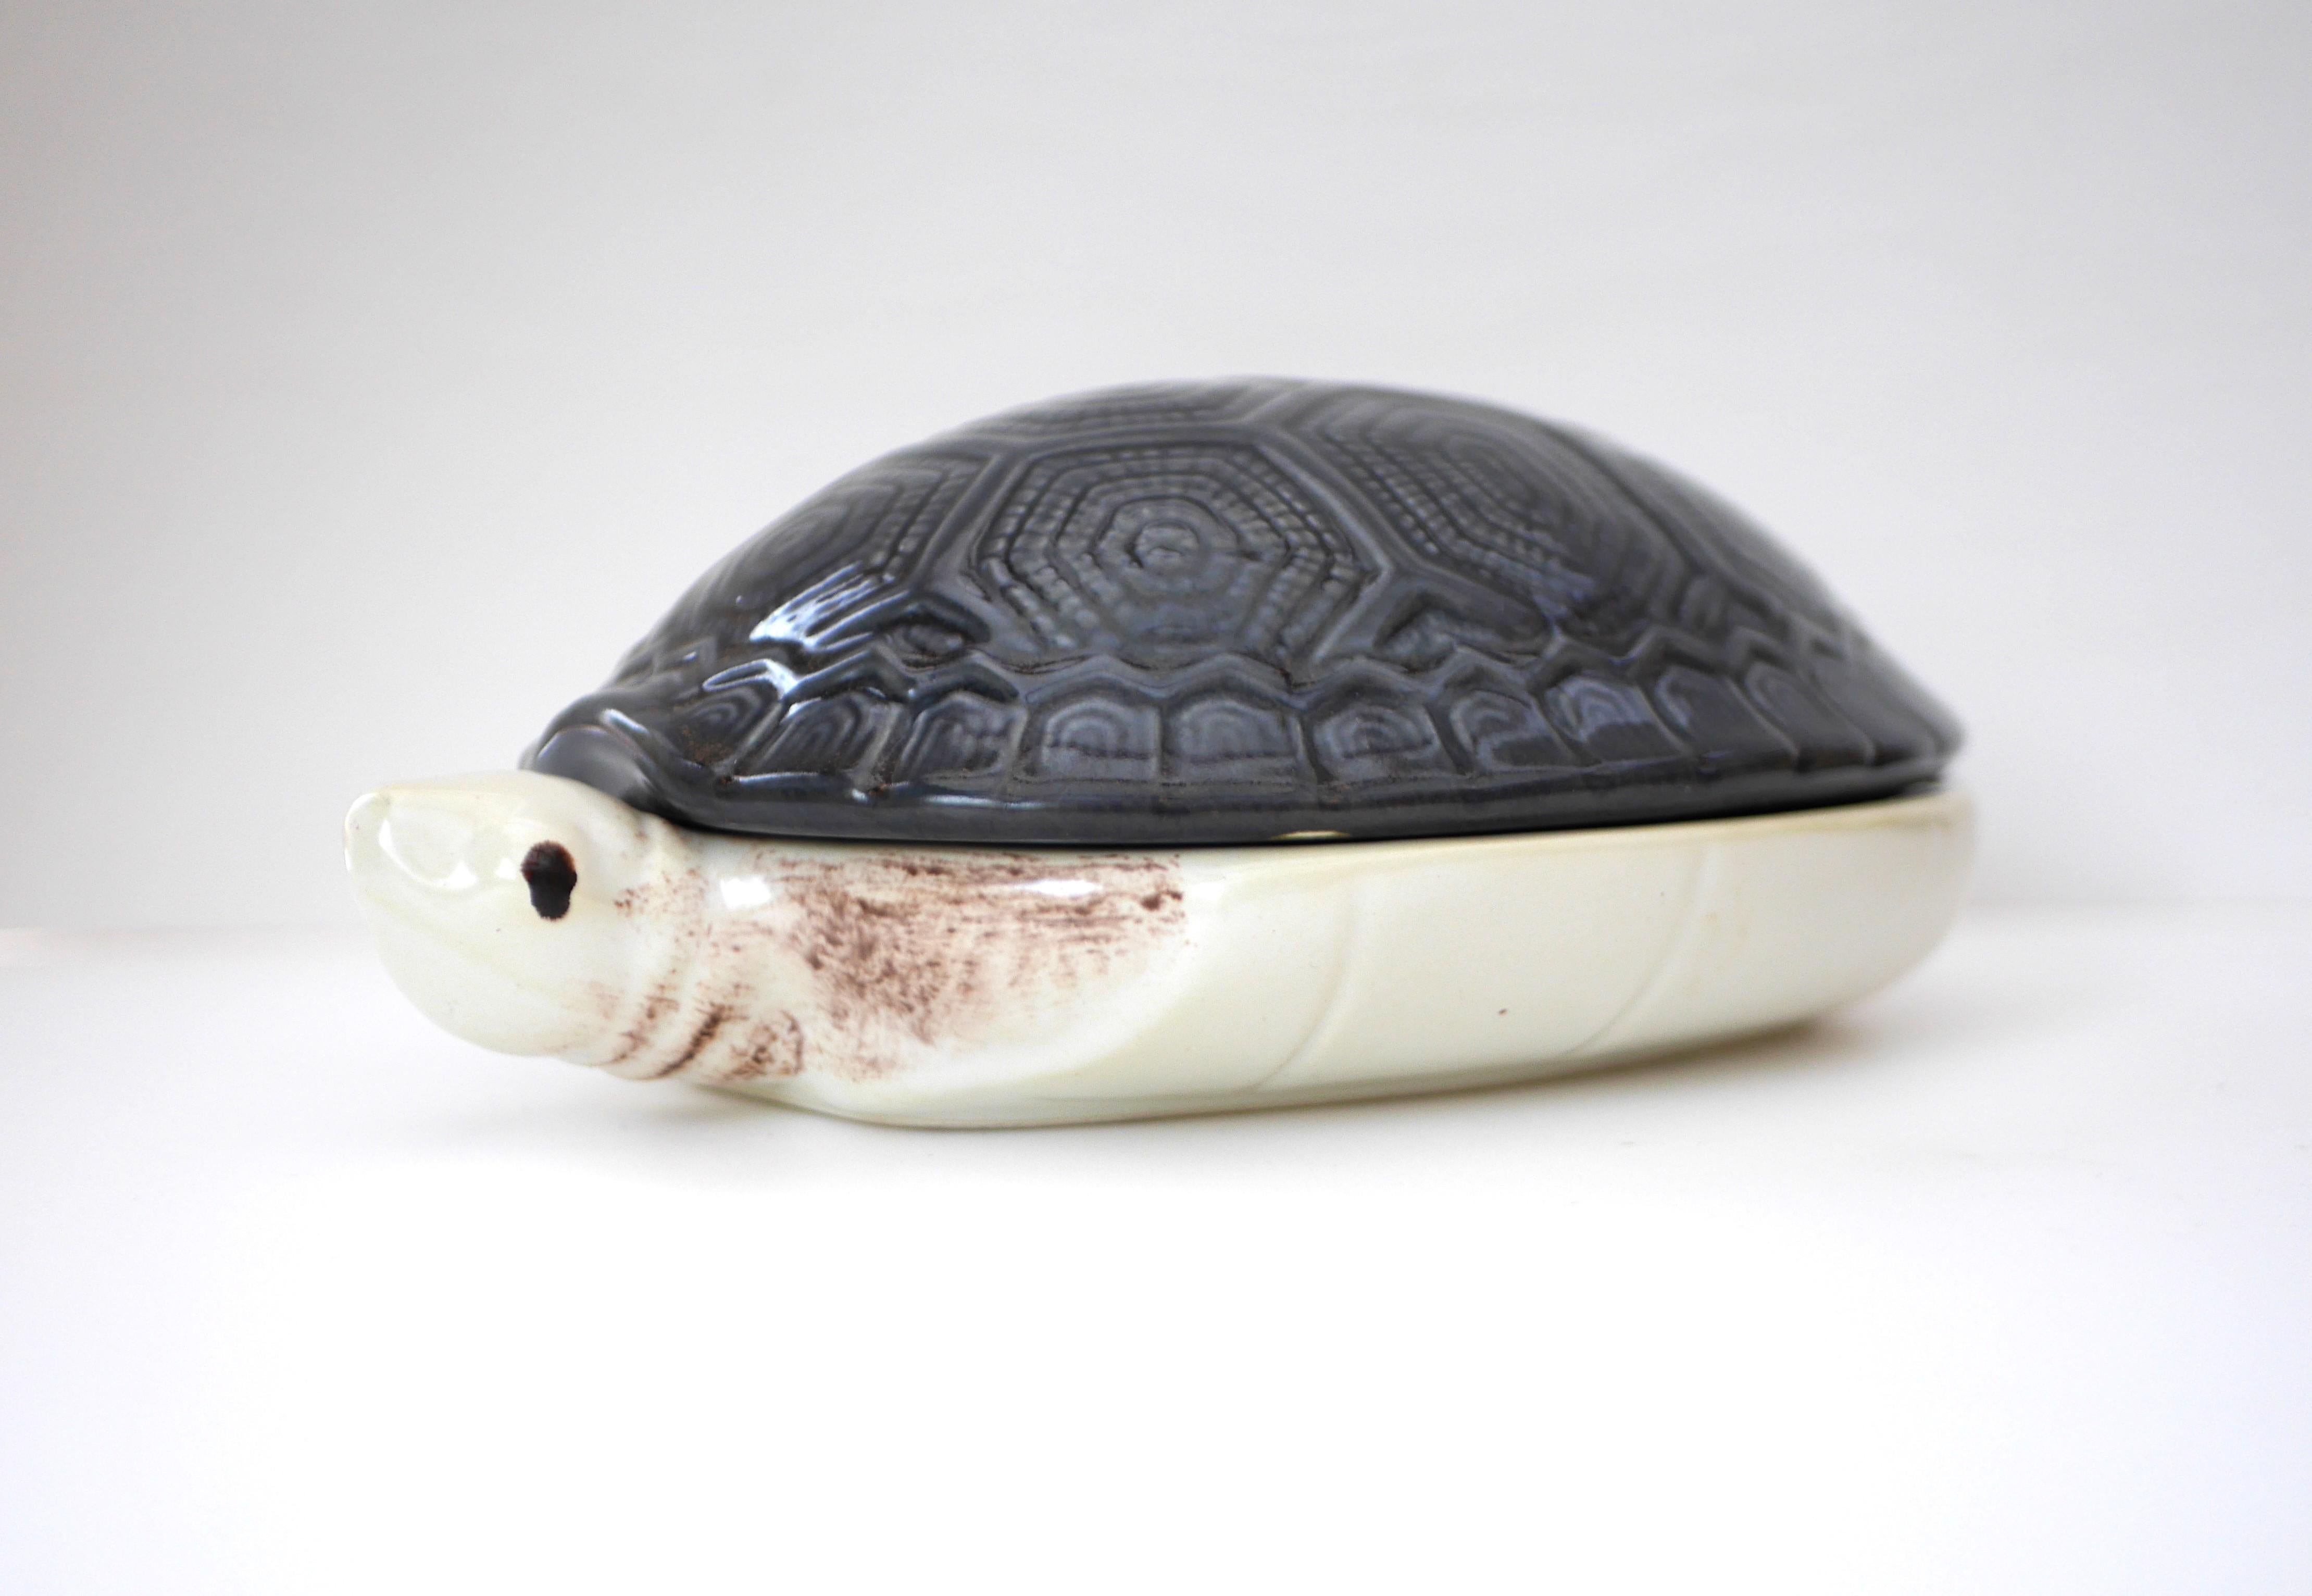 A fantastic vintage French Majolica Turtle Paté Terrine or Tureen by Michel Caugant. These terrines were decorated by hand, from the famous charcuterie Michel Caugant. It is from the 1970s and these tureens are by now very collectable, and this is a